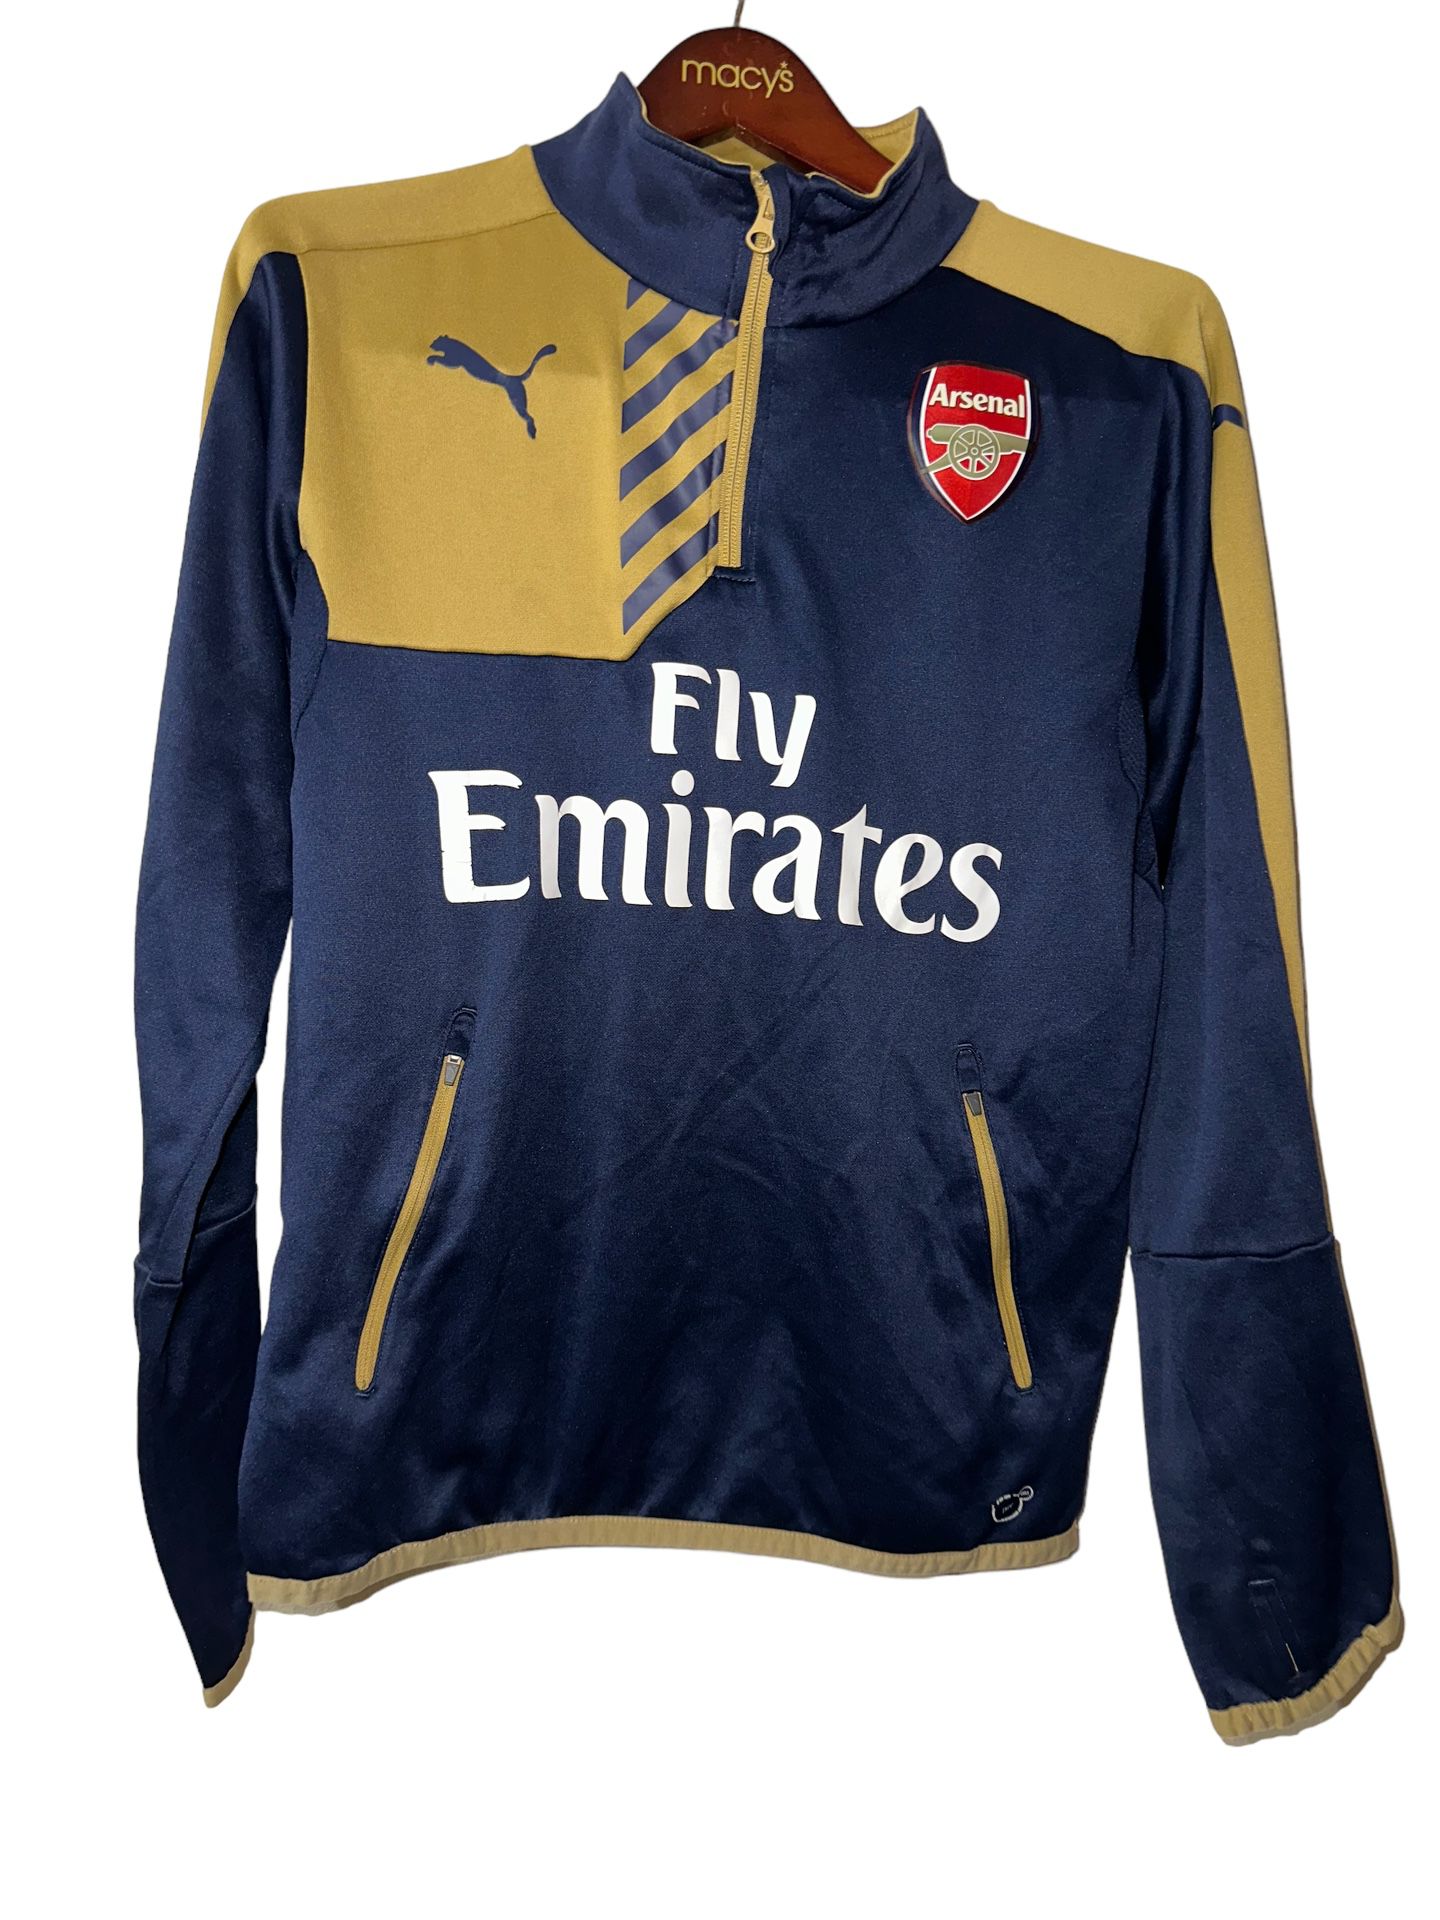 FC Arsenal Fly Emirates Puma Pullover Jacket 1/4 Zip Size:Small